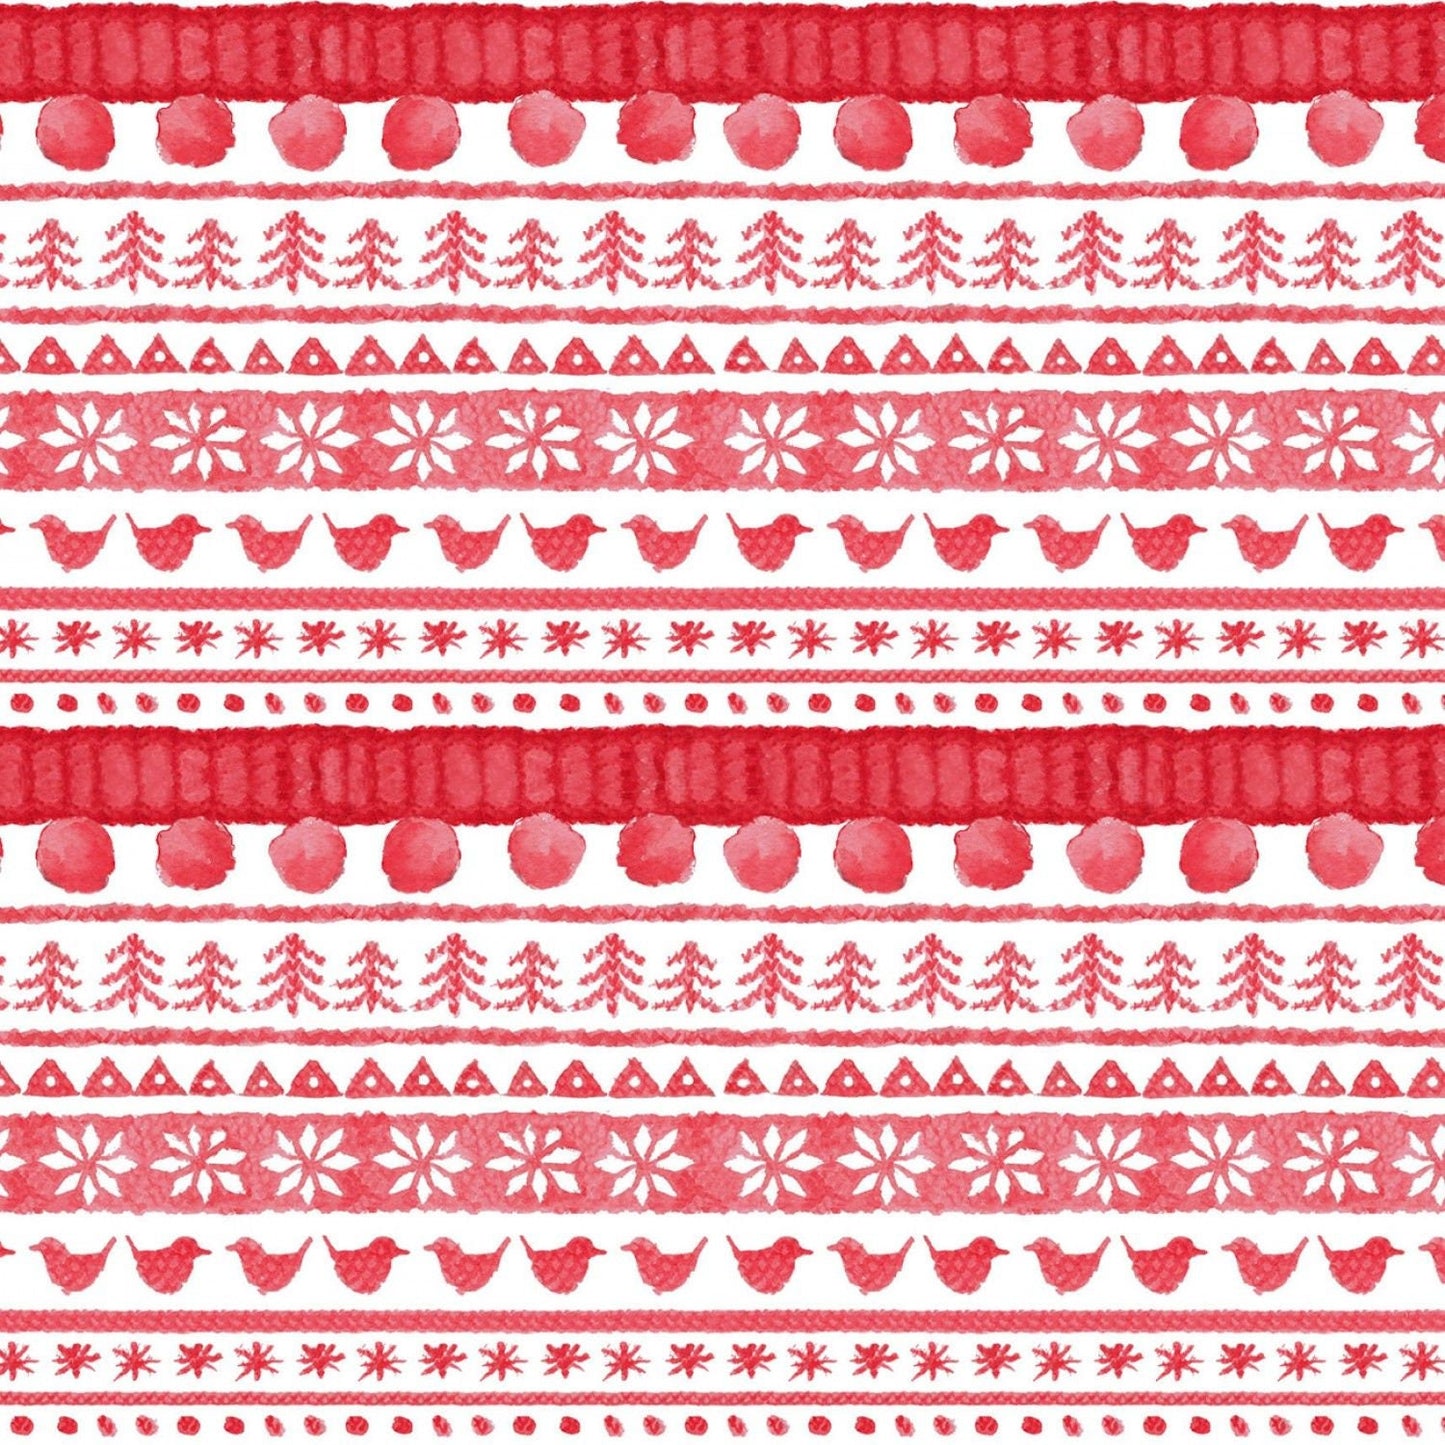 Warm Wishes by Hannah Dale of Wrendale Designs Sweater Stripe Red D6314M-R Digitally Printed Cotton Woven Fabric